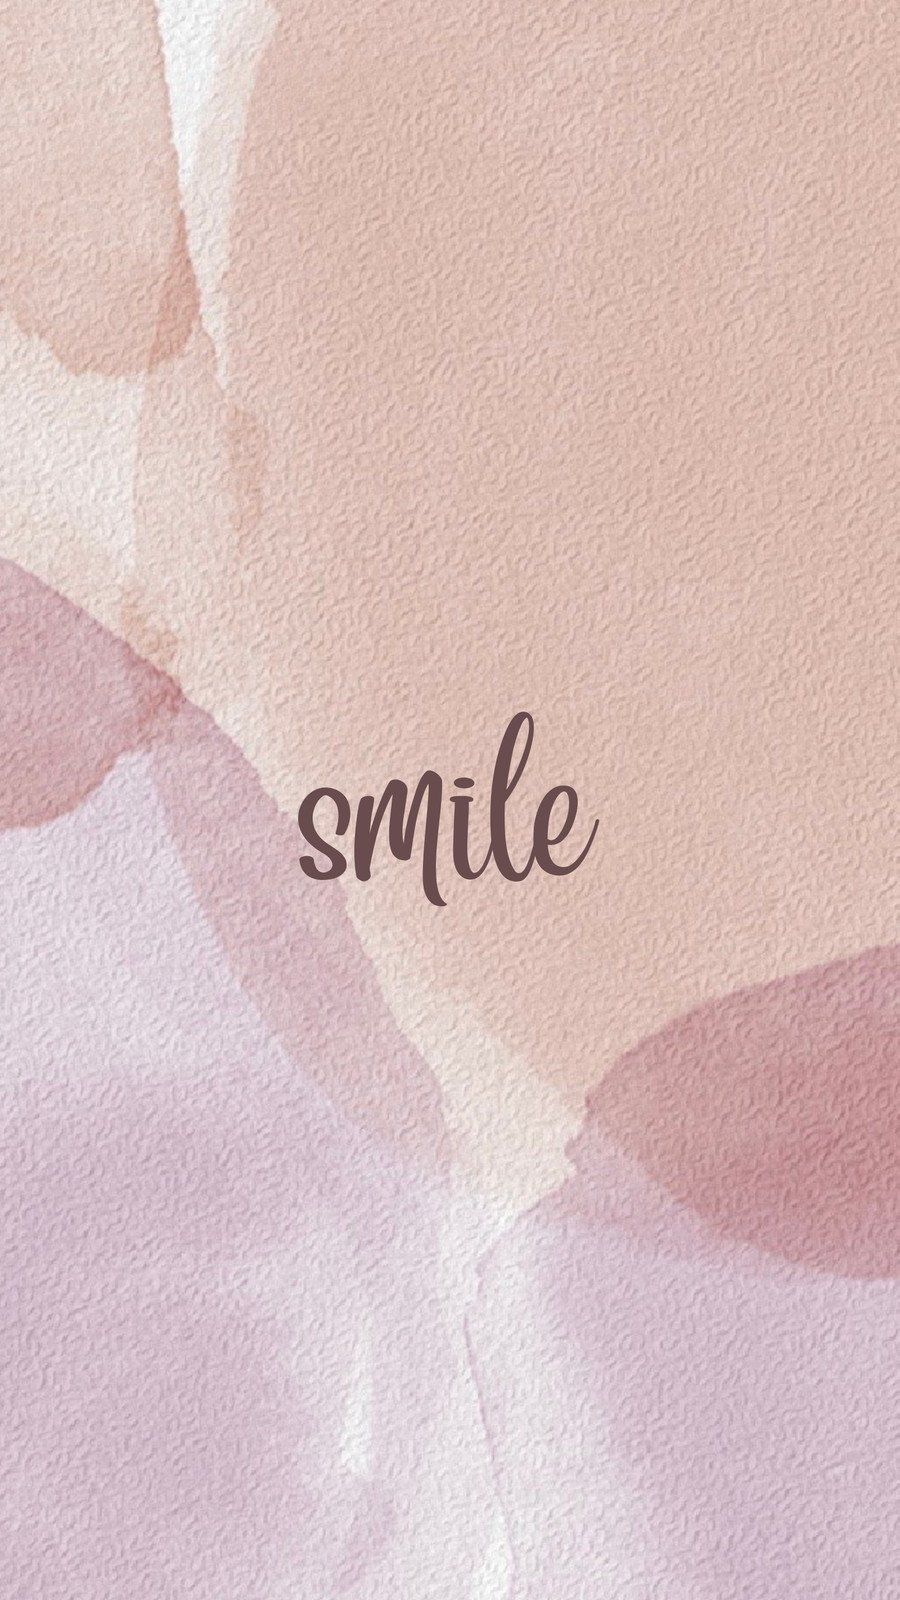 Watercolor background with the word smile - Smile